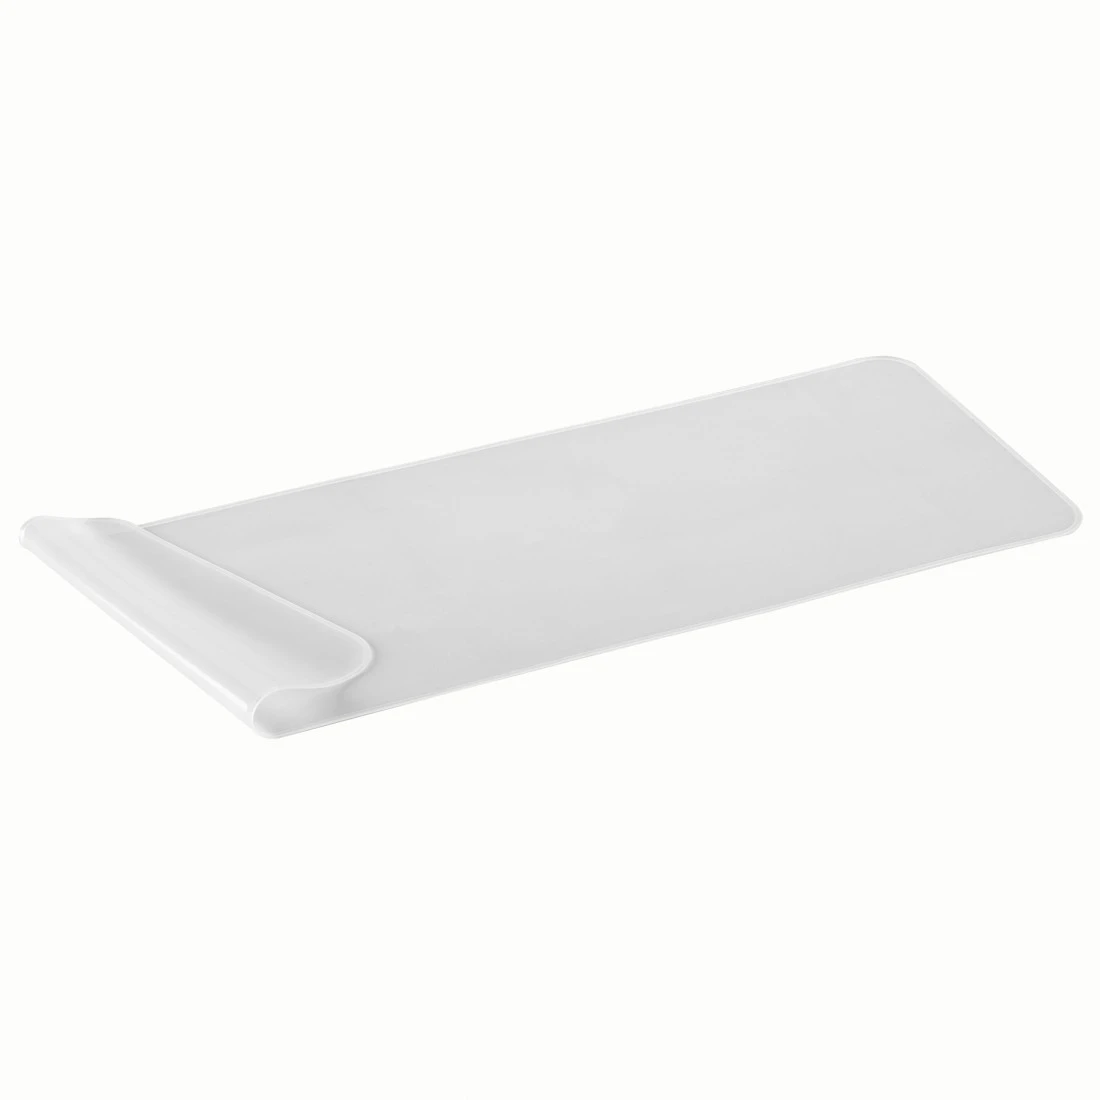 Protège-clavier notebook Silicone 36 Cm X 13 Cm X 06 Mm